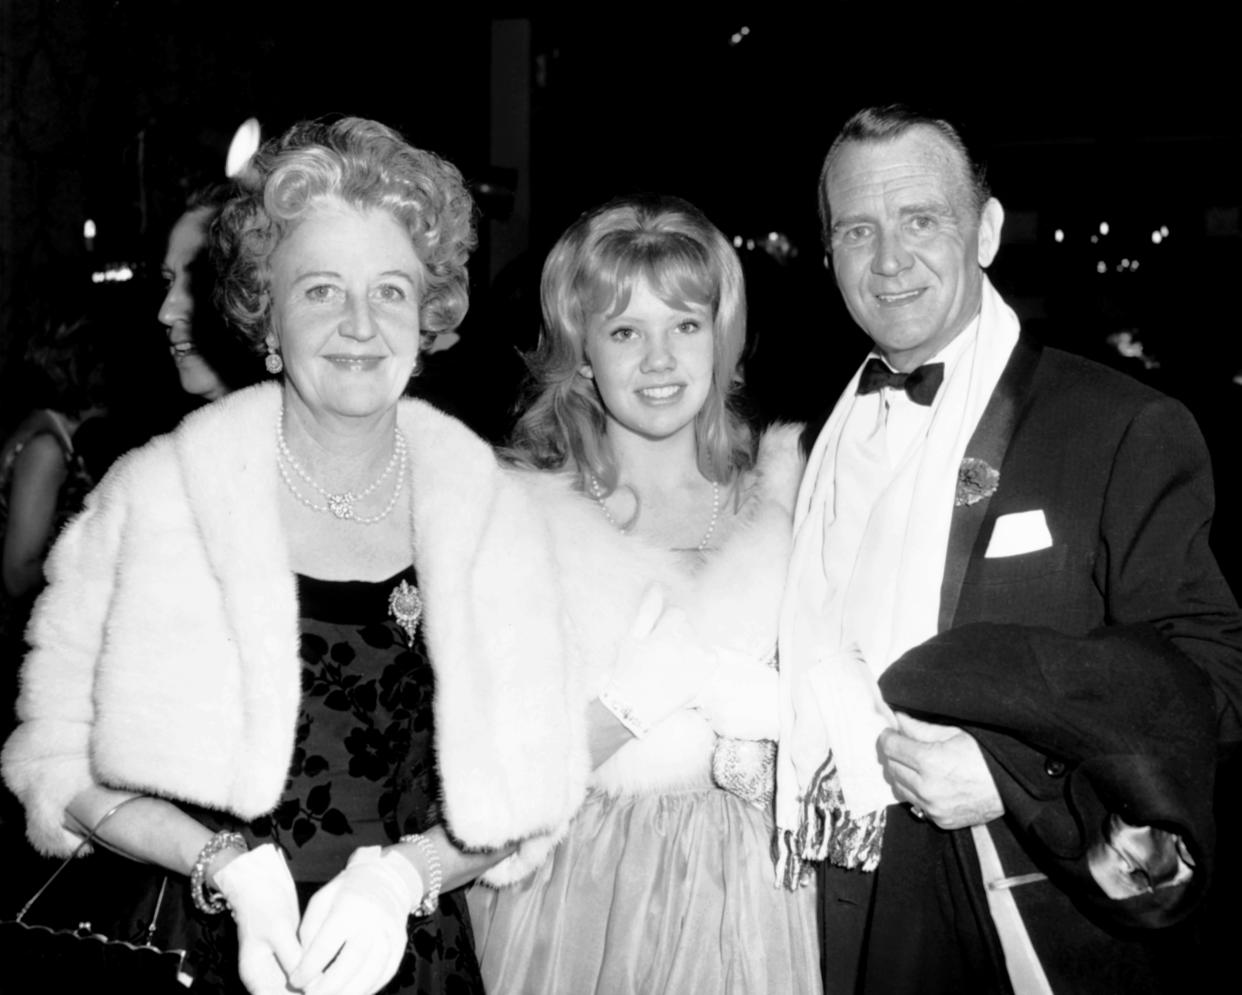 Hayley Mills, center, with her parents, Mary Hayley Bell and John Mills, at the March 1963 premiere of 